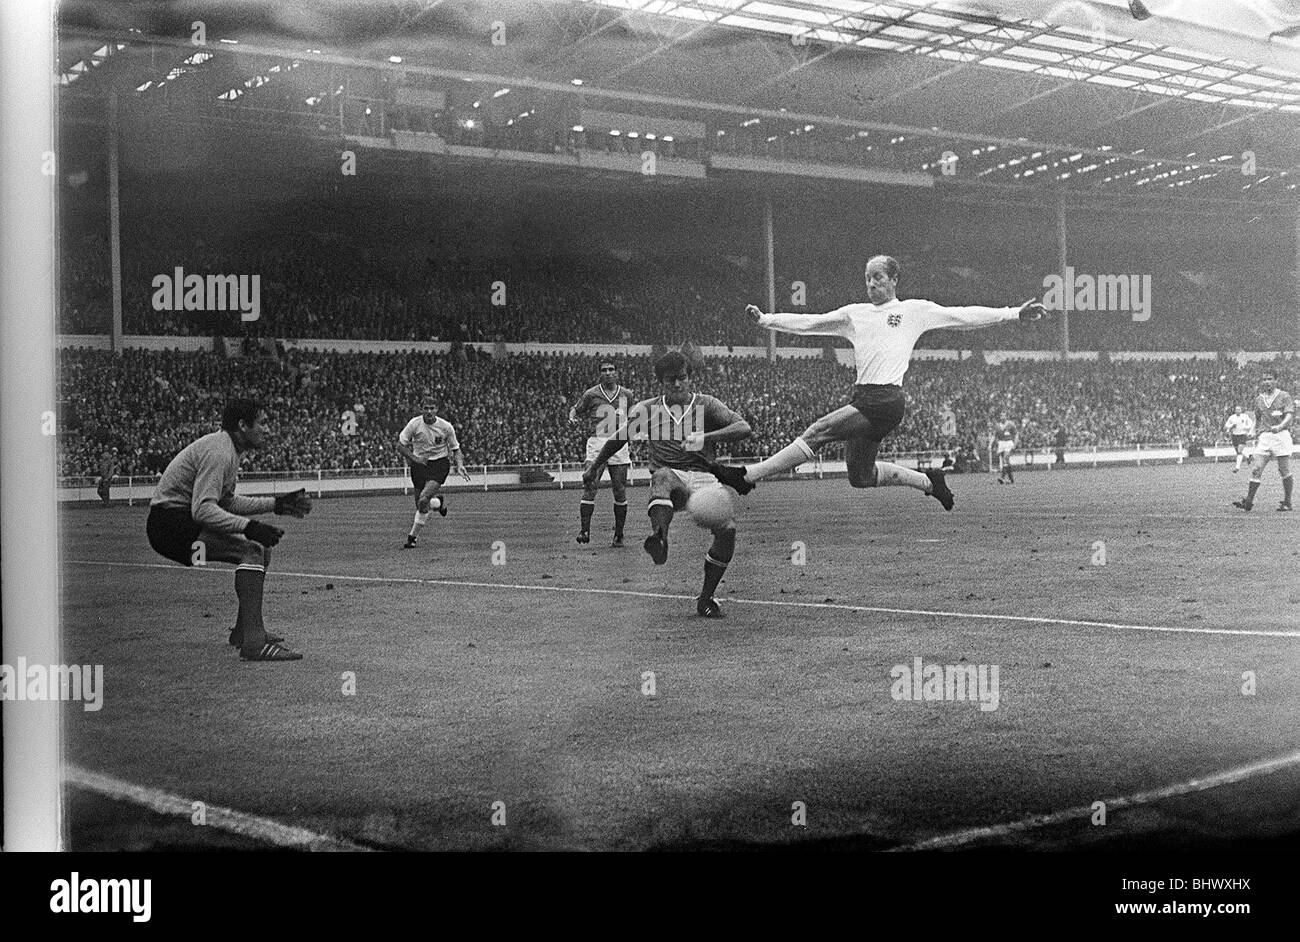 1966 World Cup Group One match at Wembley Stadium. England 2 v France 0. England's Bobby Charlton on fine form against the French defence as he leaps up to get a shot in at goal Stock Photo